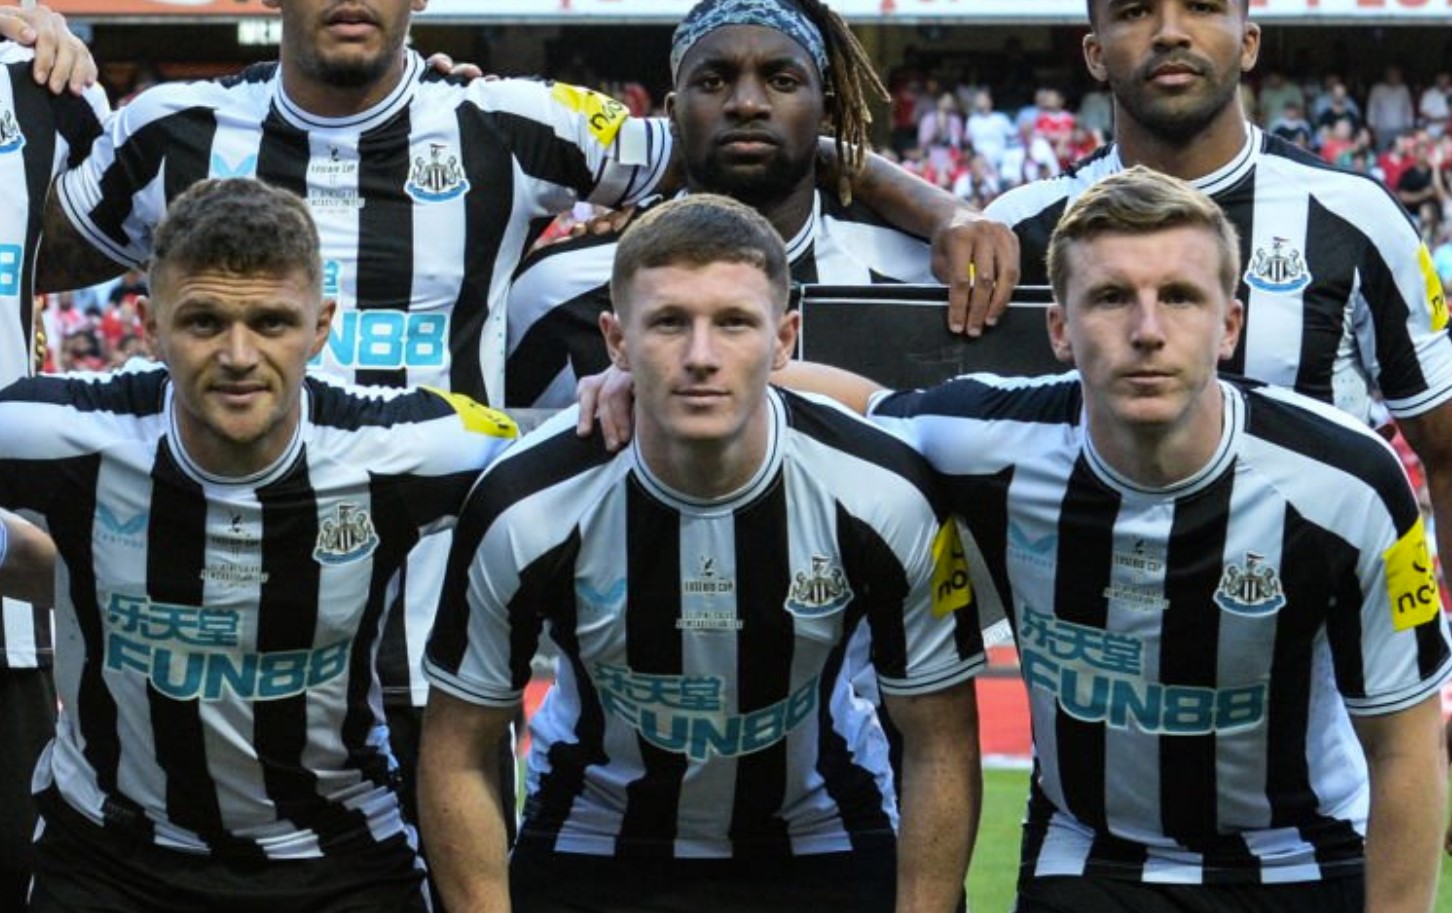 Newcastle reach final decision on Elliot Anderson after huge loan interest – The Telegraph